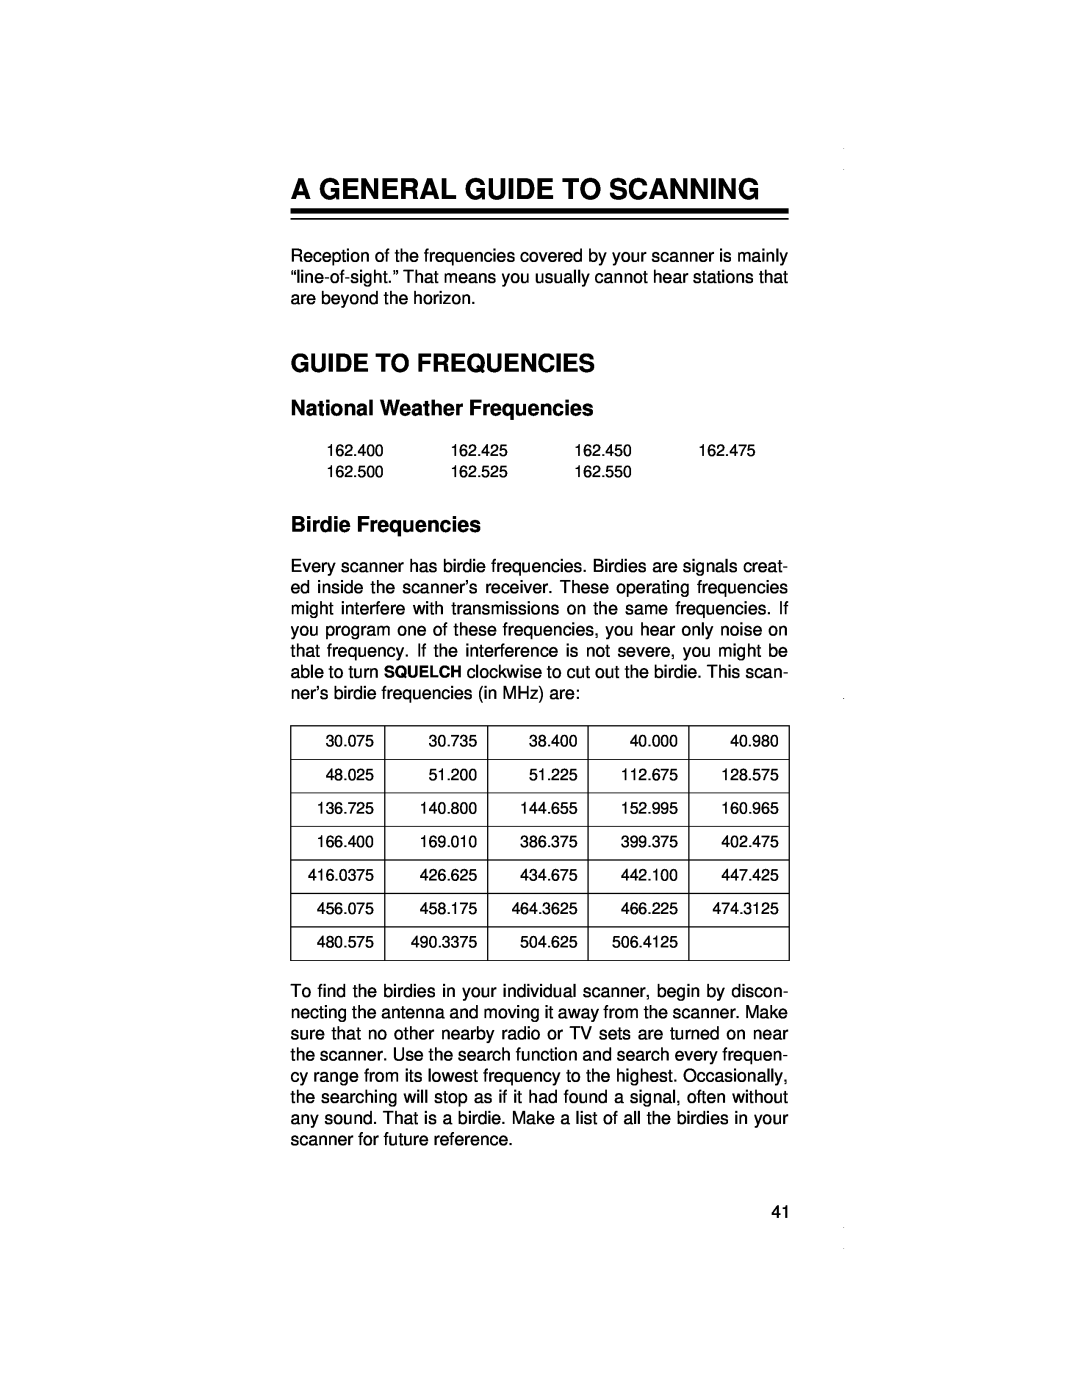 Radio Shack PRO-79 A General Guide To Scanning, Guide To Frequencies, National Weather Frequencies, Birdie Frequencies 